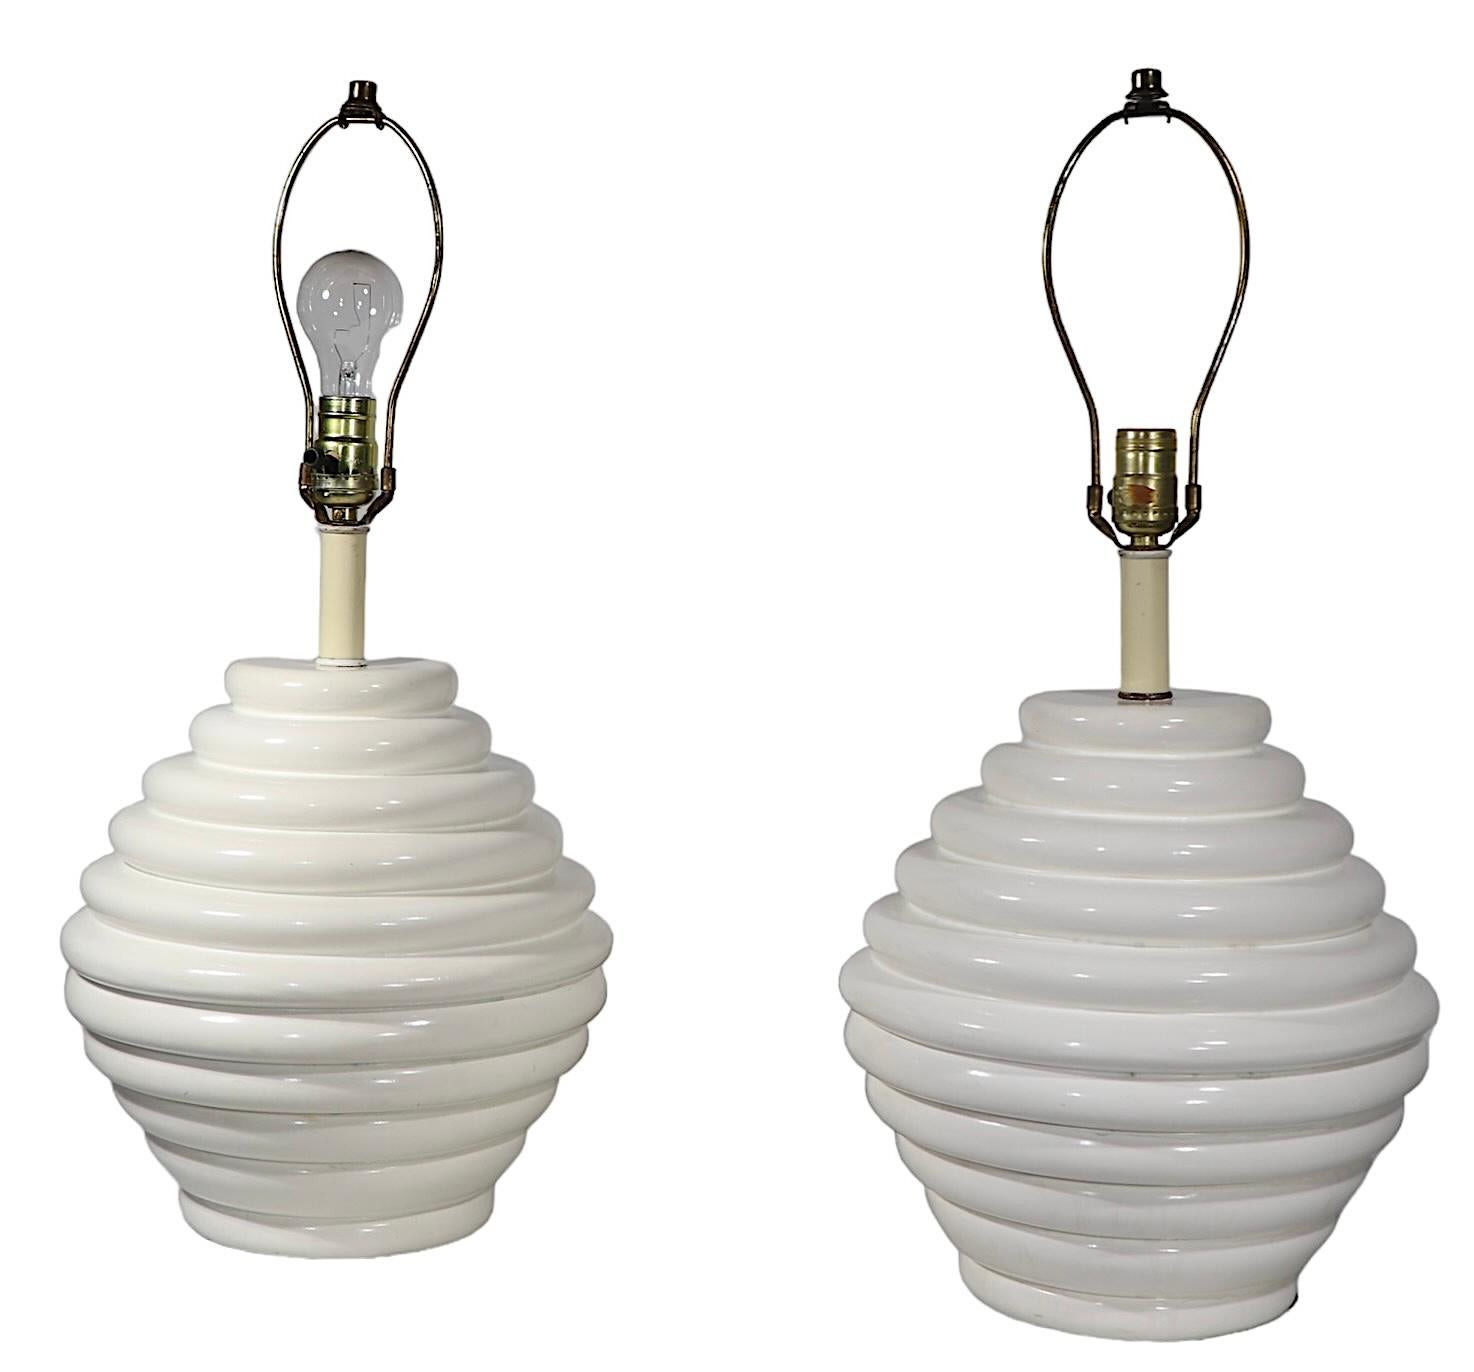 Pr. Mid Century Space Age Bulbous Form Table Lamps in White Finish c. 1950/70's For Sale 11